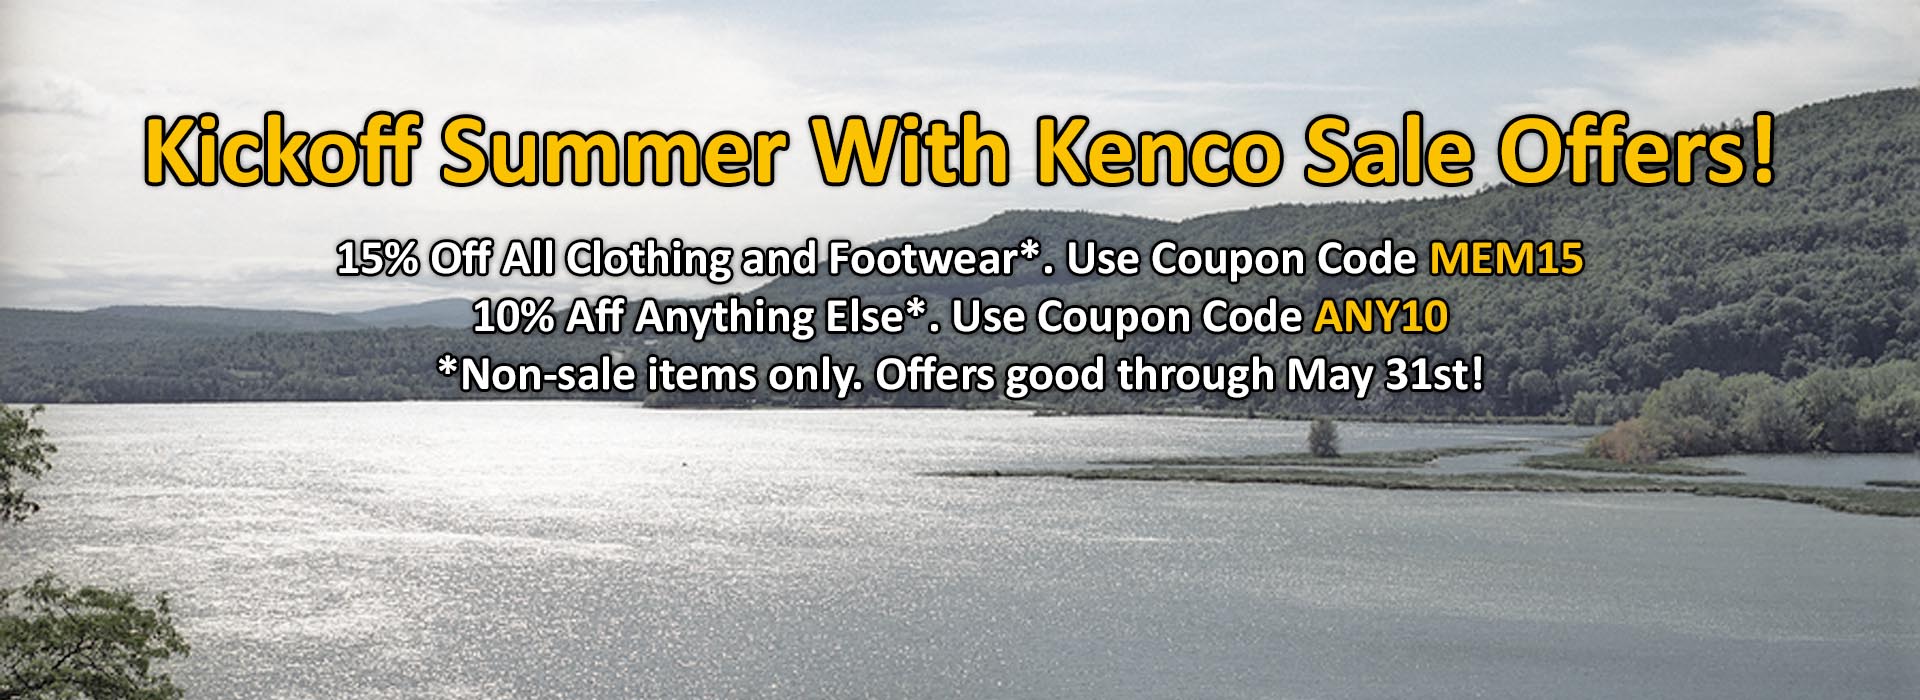 Kickoff Summer With Kenco Sale Offers!